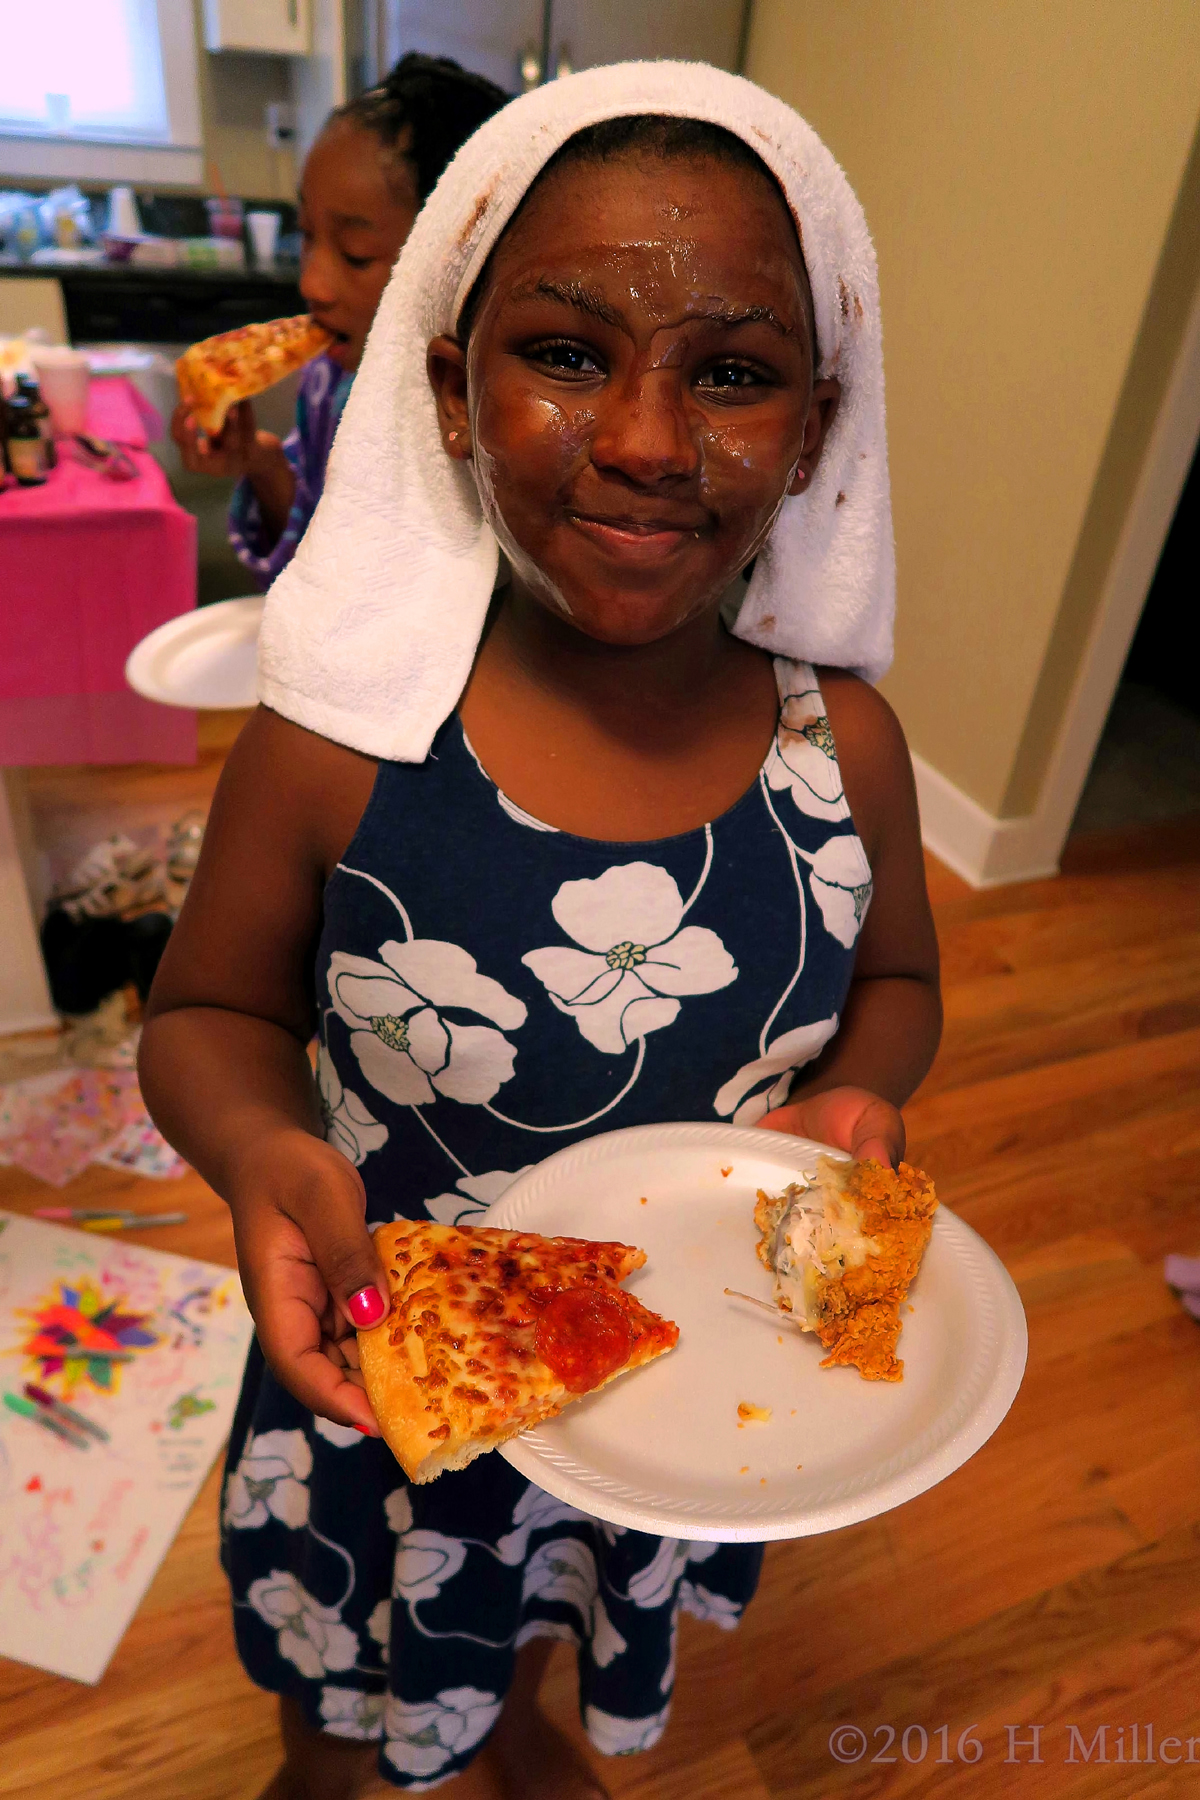 Smiling With Her Facial Masque On During Pizza!